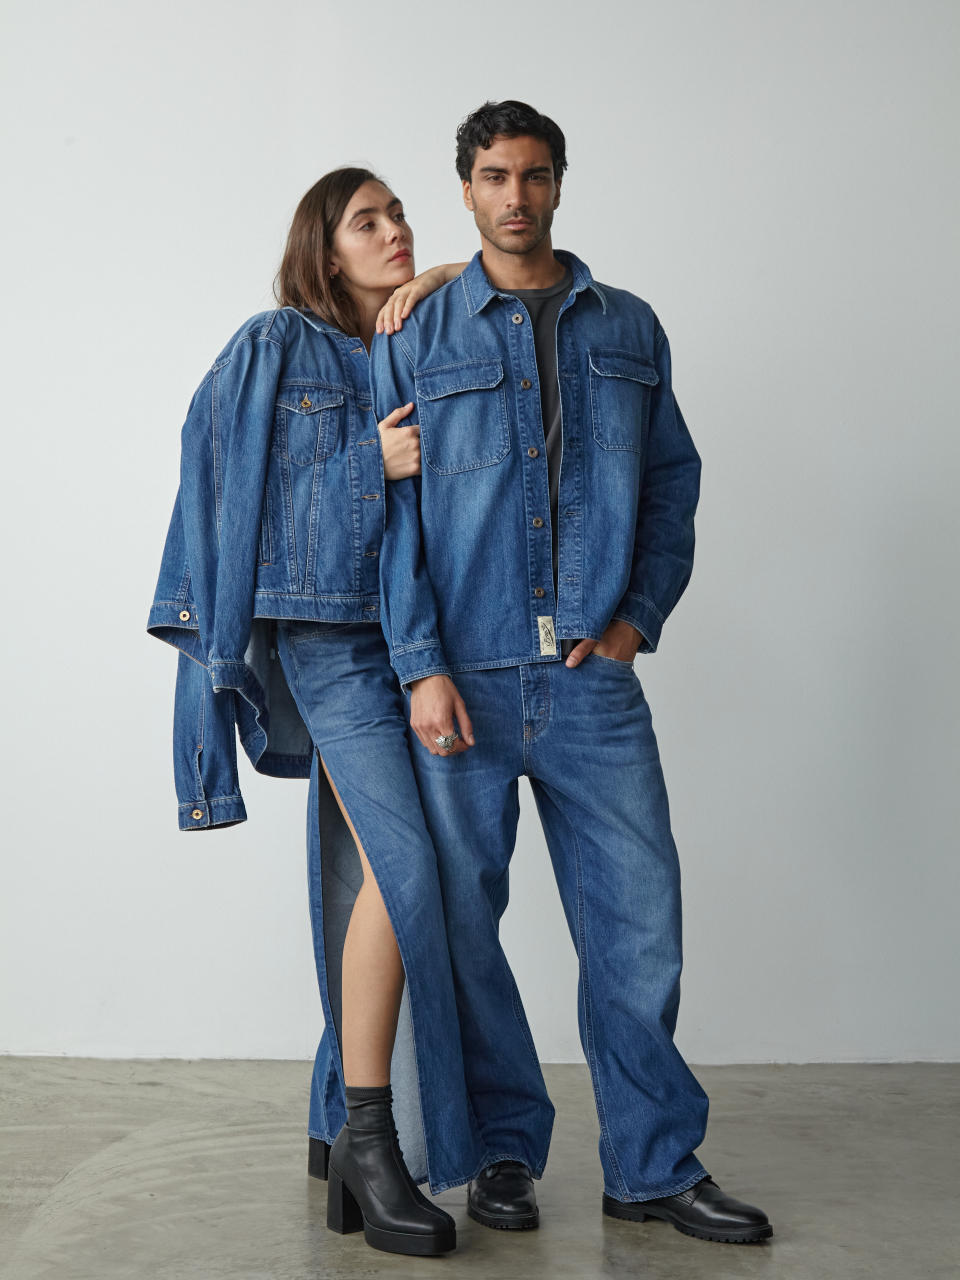 Looks from the Pence 1979 x Kanyuk capsule collection.